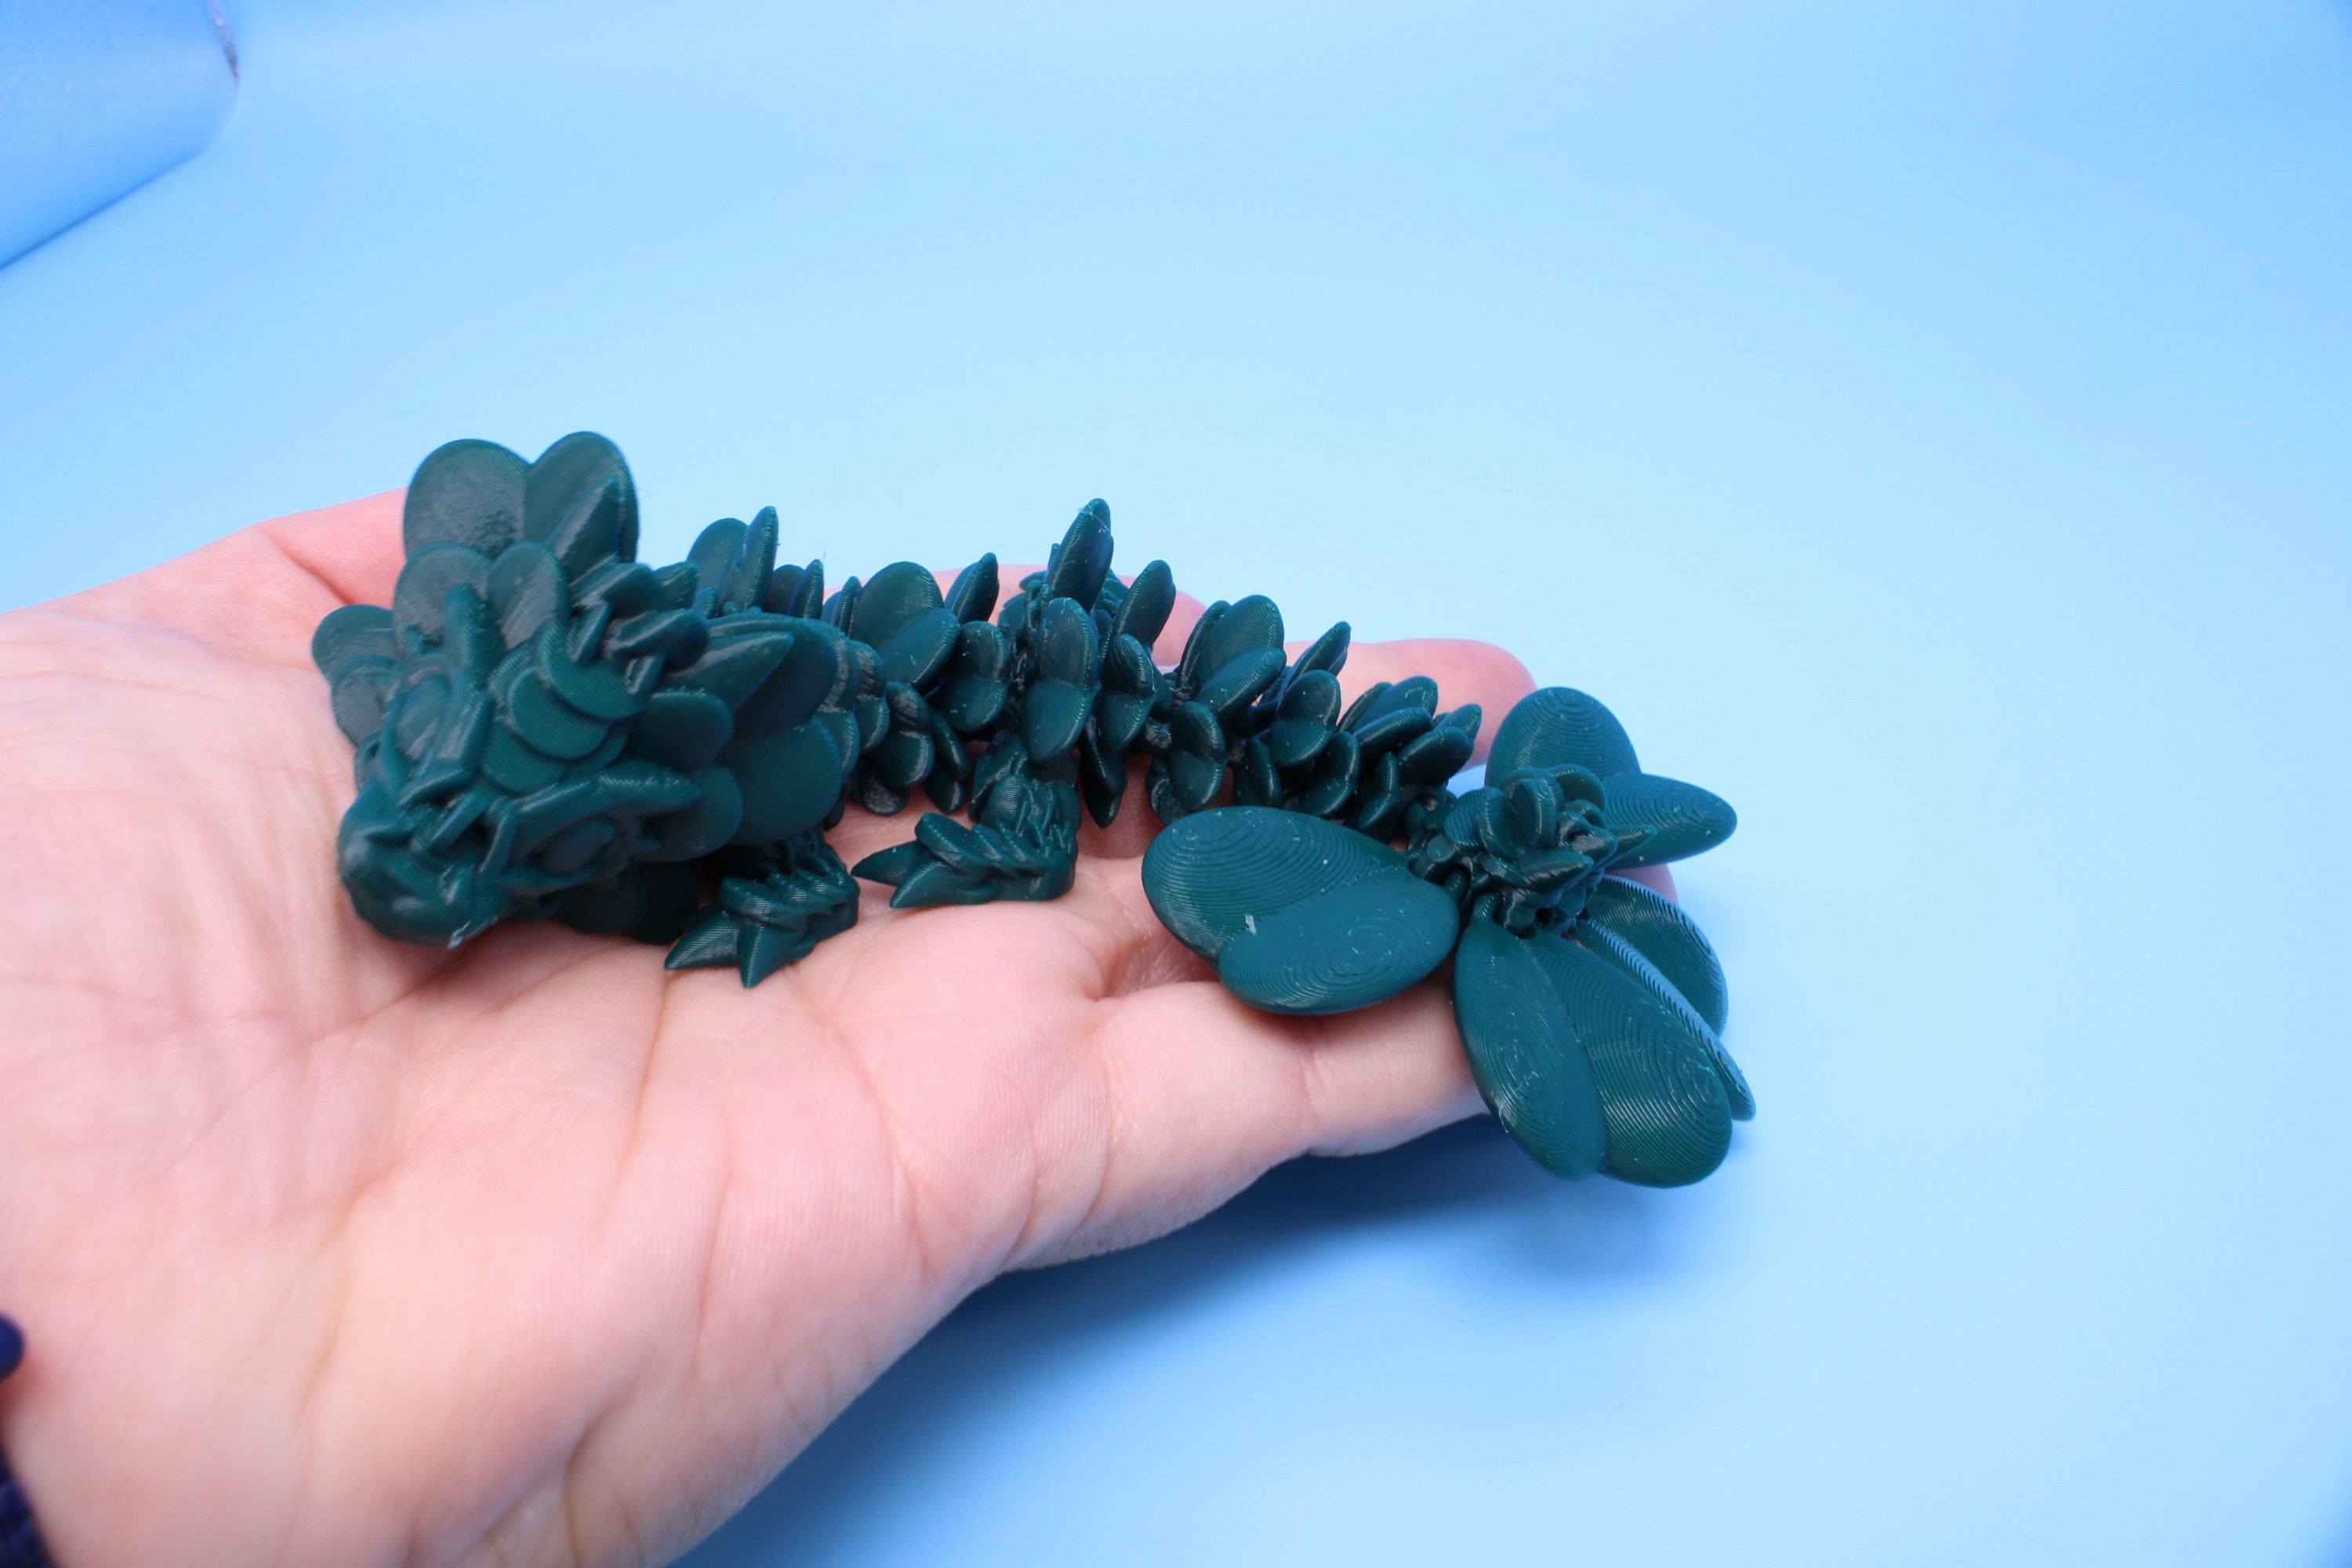 Baby Clover Dragon | 3D printed Articulating Dragon Fidget Toy | Flexi | 6 in Lucky Dragon | 4 Leaf Clover